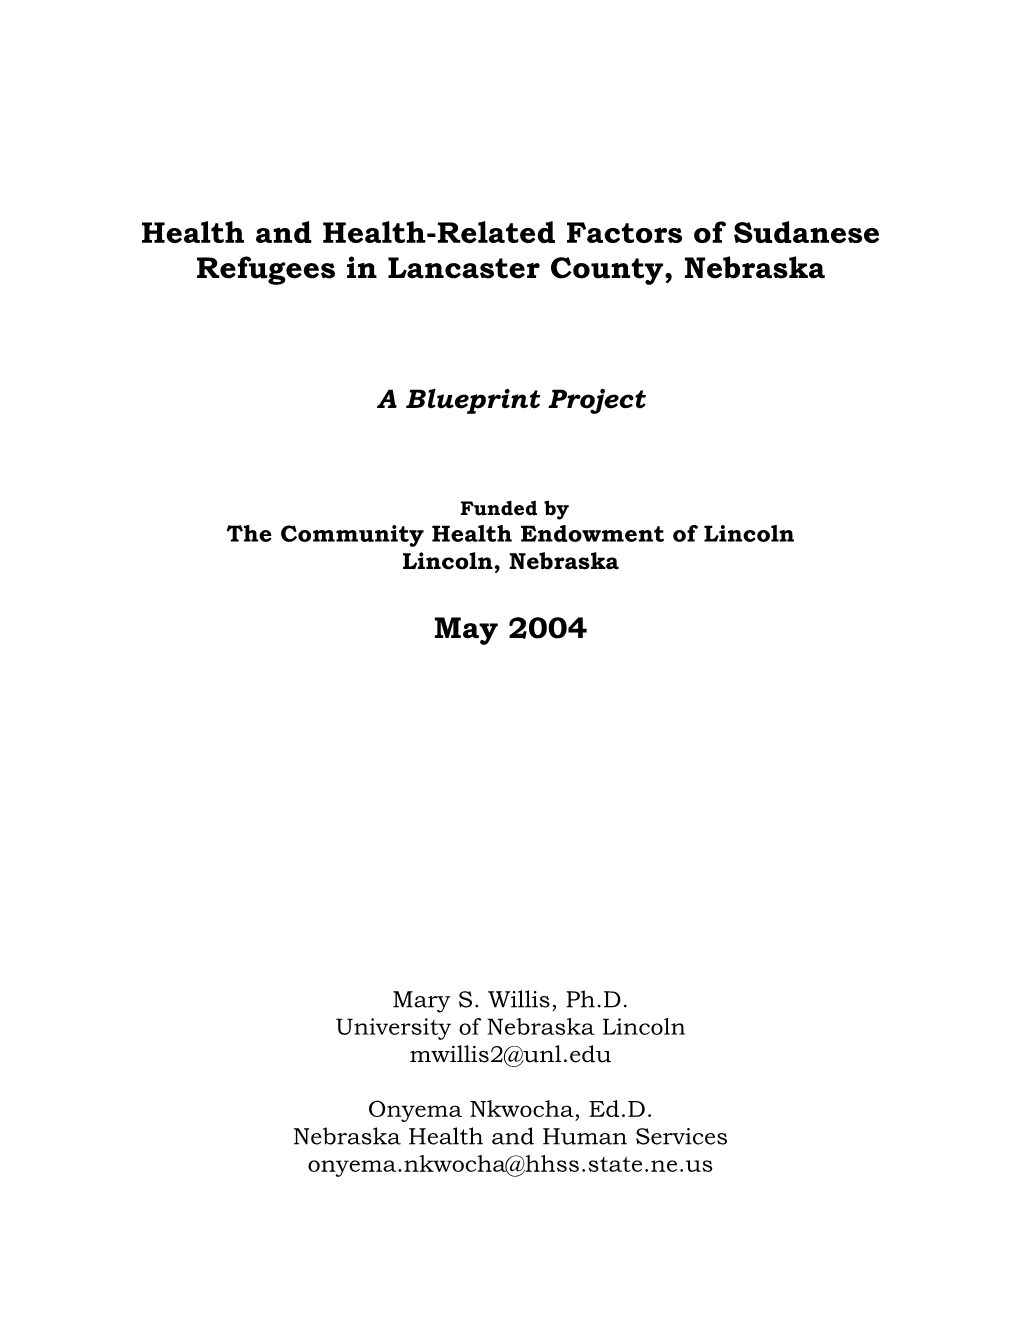 Health and Health-Related Factors of Sudanese Refugees in Lancaster County, Nebraska